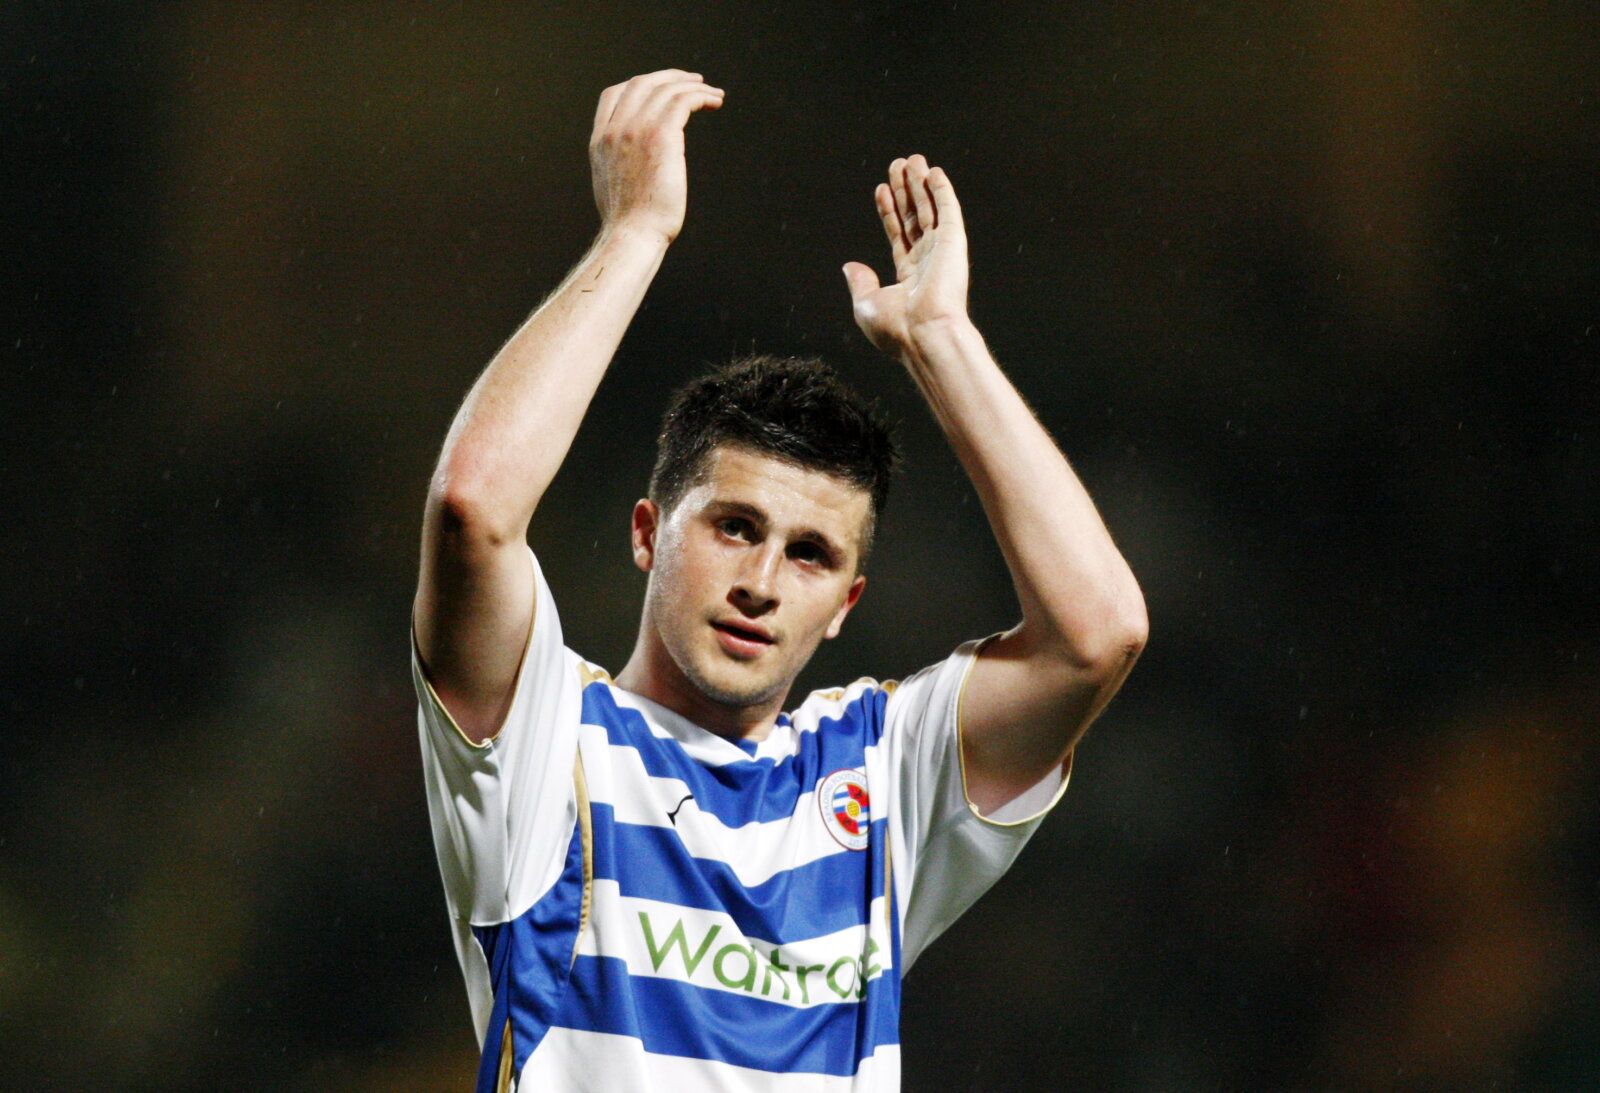 Football - Norwich City v Reading - Coca-Cola Football League Championship - Carrow Road - 08/09 - 27/4/09 
Shane Long - Reading applauds fans at full time 
Mandatory Credit: Action Images / Paul Harding